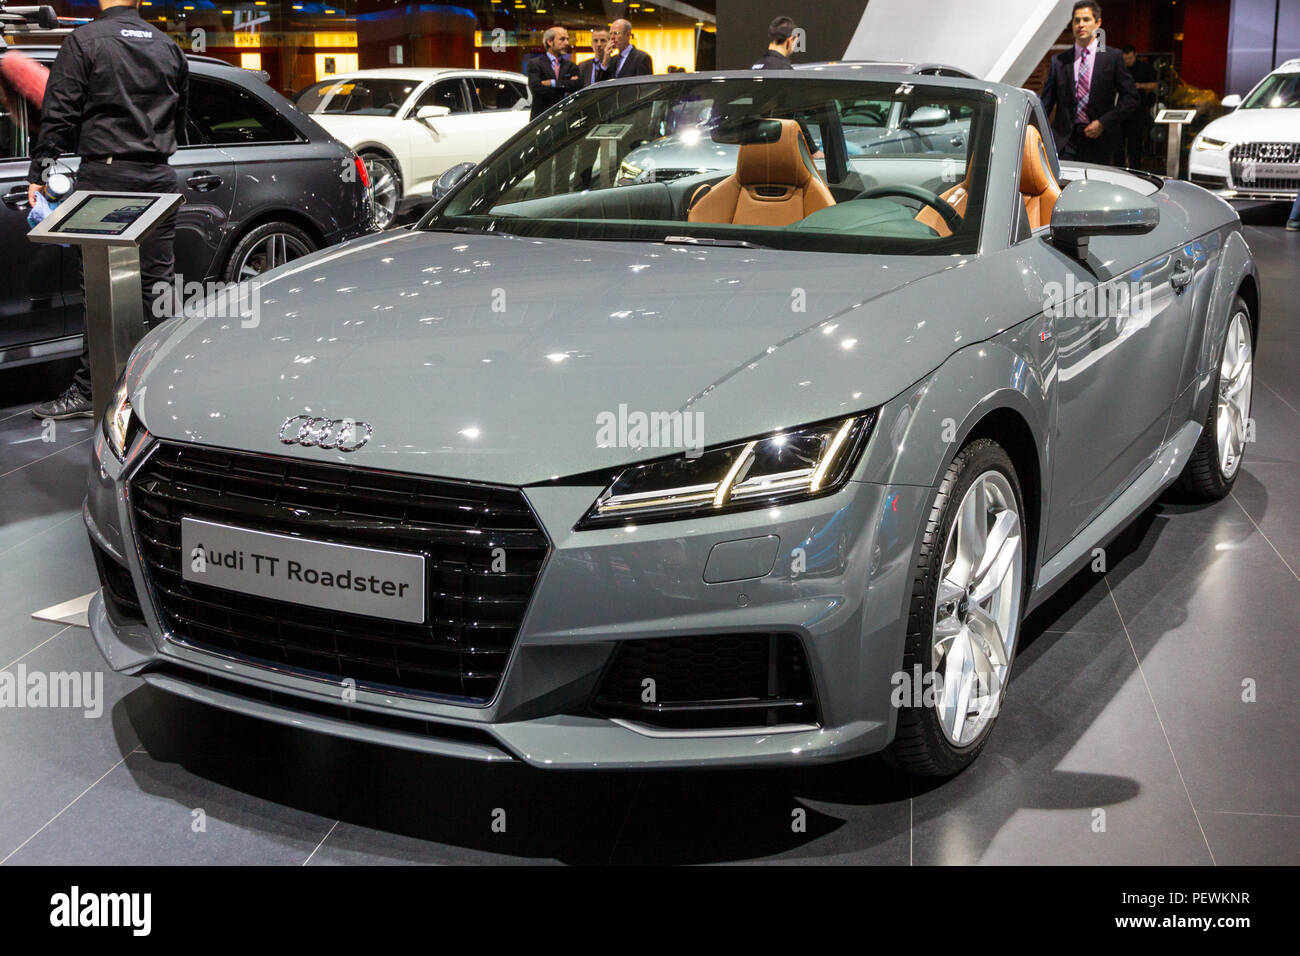 BRUSSELS - JAN 12, 2016: Audi TT Roadster car showcased at the Brussels Motor Show. Stock Photo